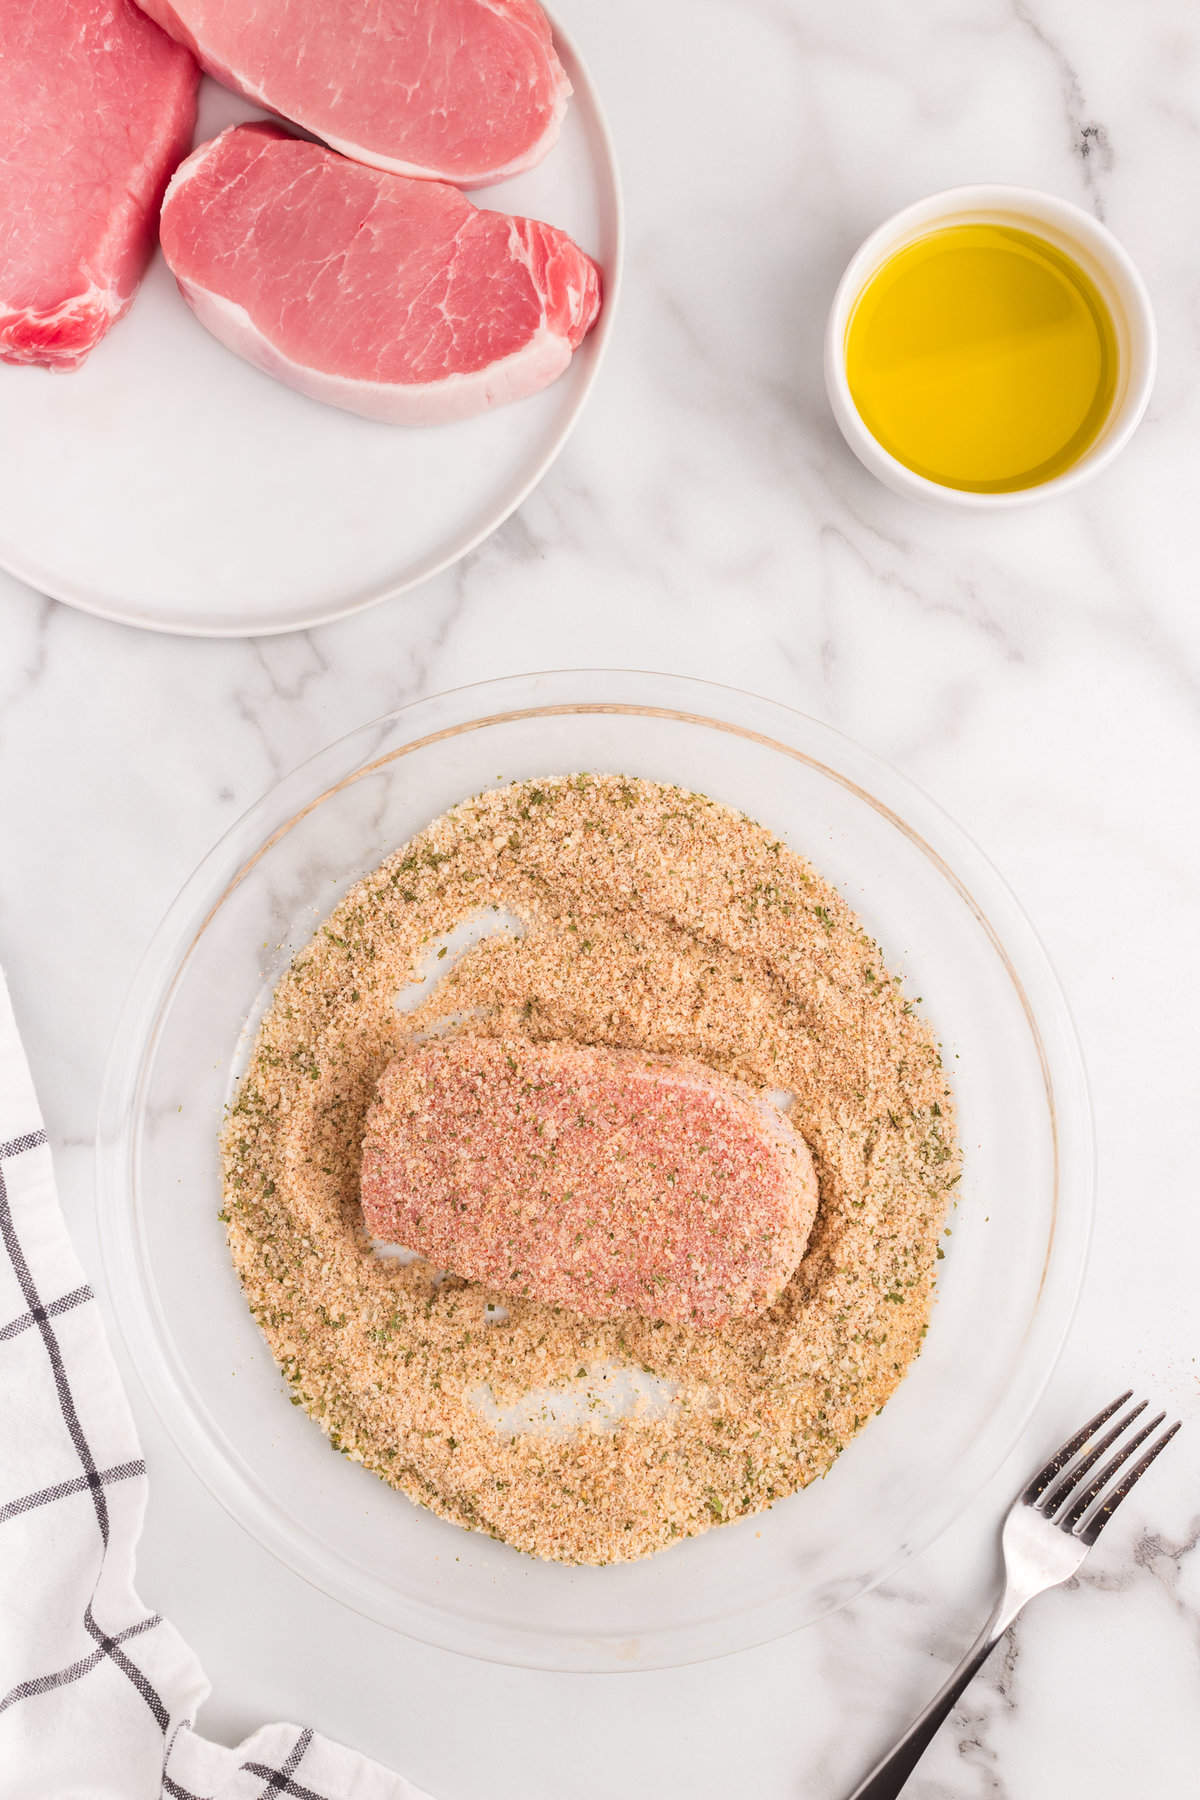 Coating a pork chop with the combined seasoning for Parmesan Crusted Pork Chops